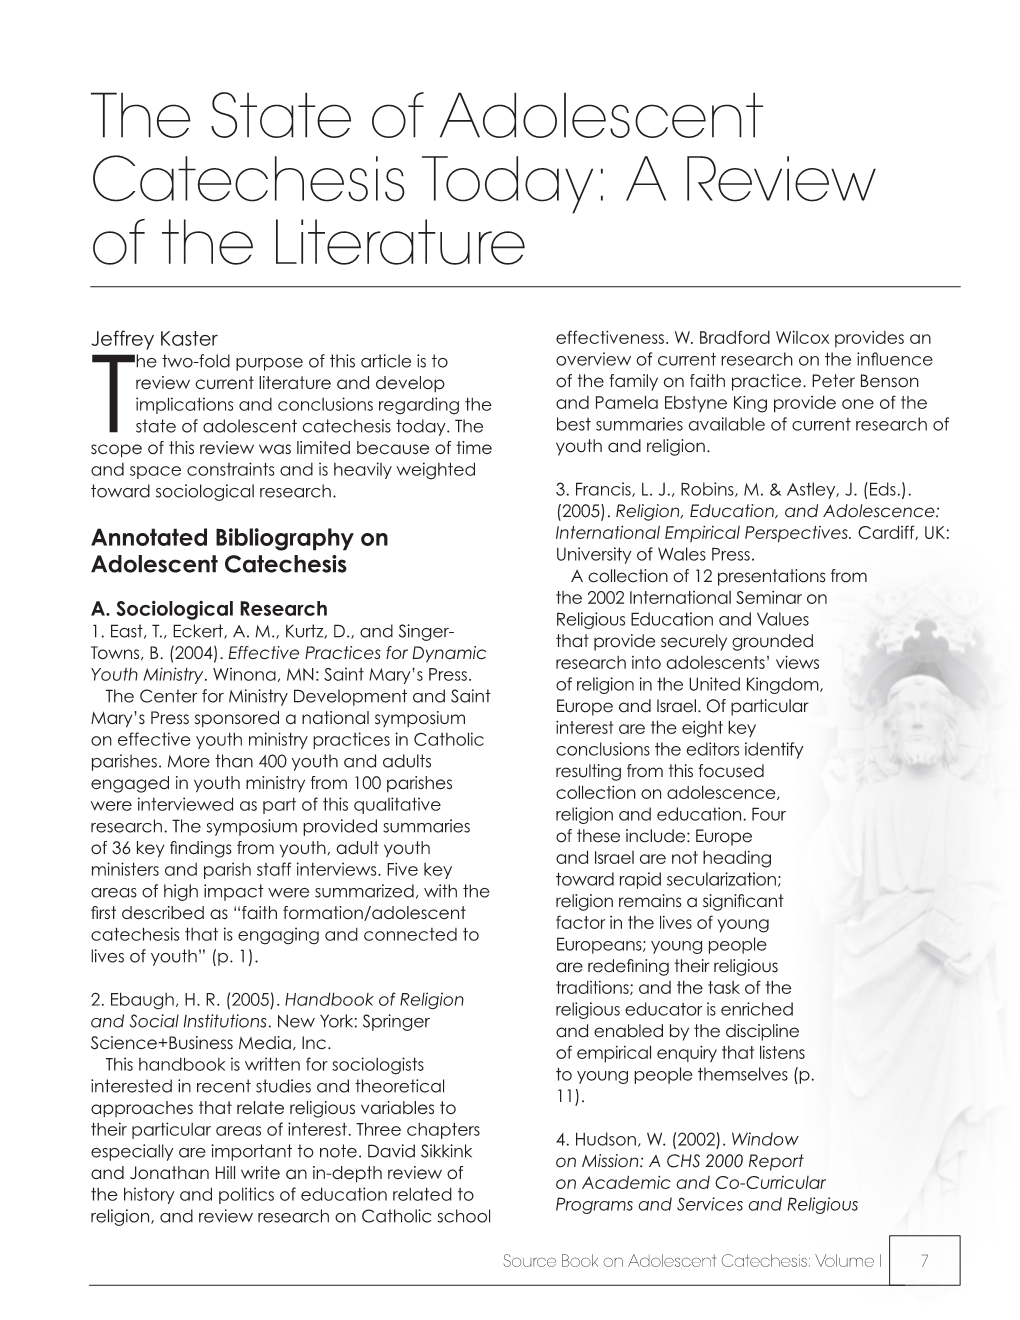 The State of Adolescent Catechesis Today: a Review of the Literature